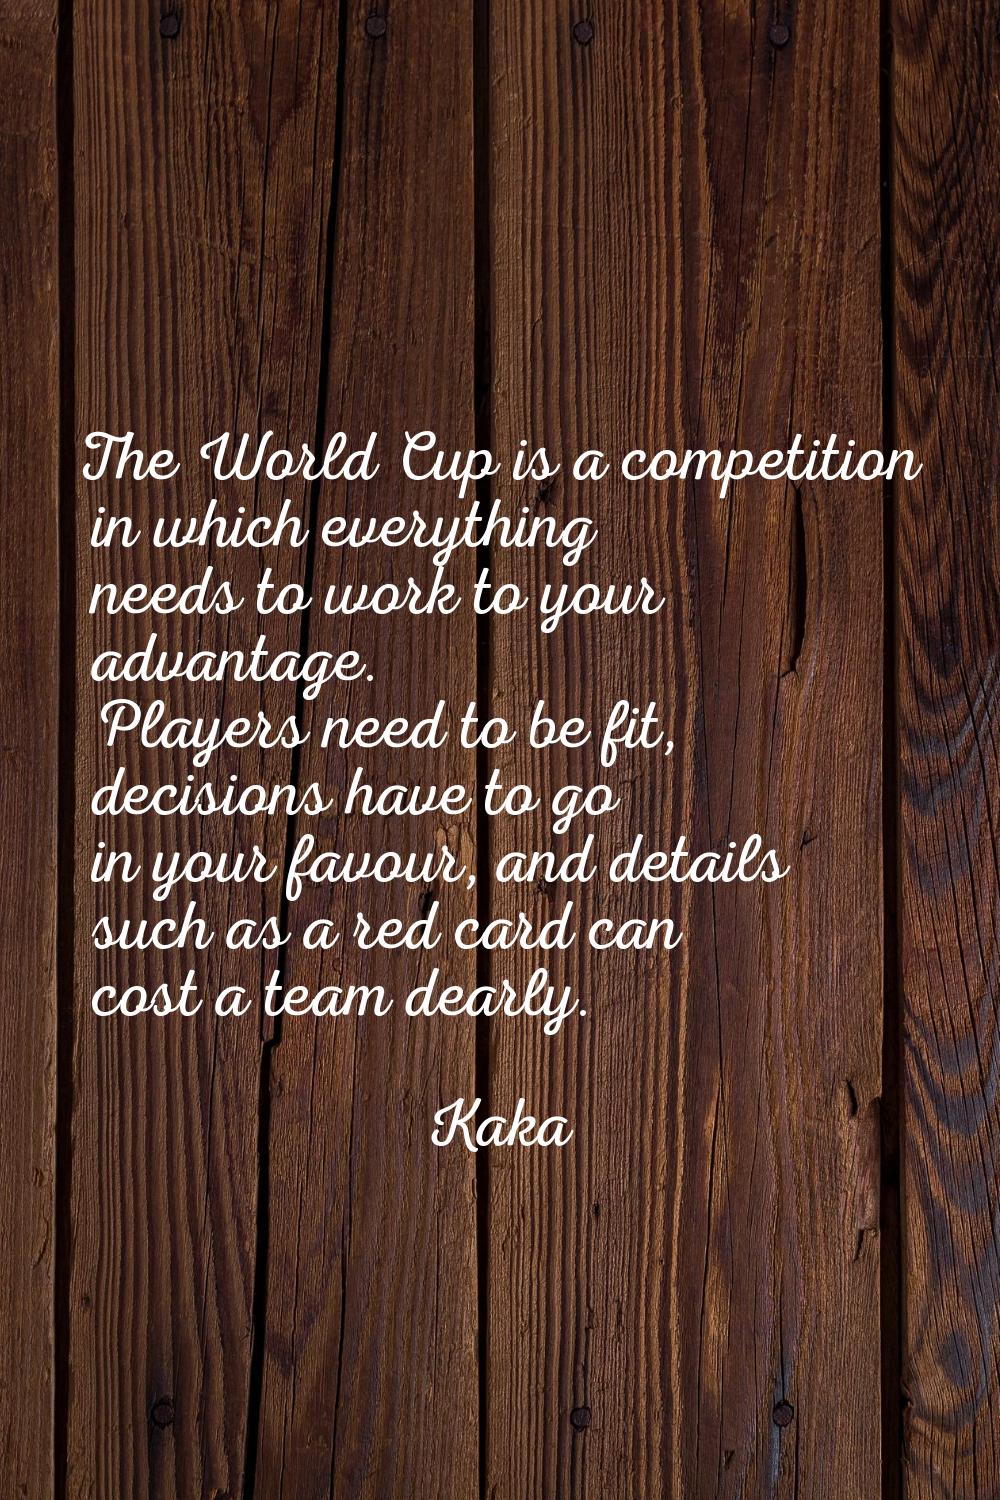 The World Cup is a competition in which everything needs to work to your advantage. Players need to